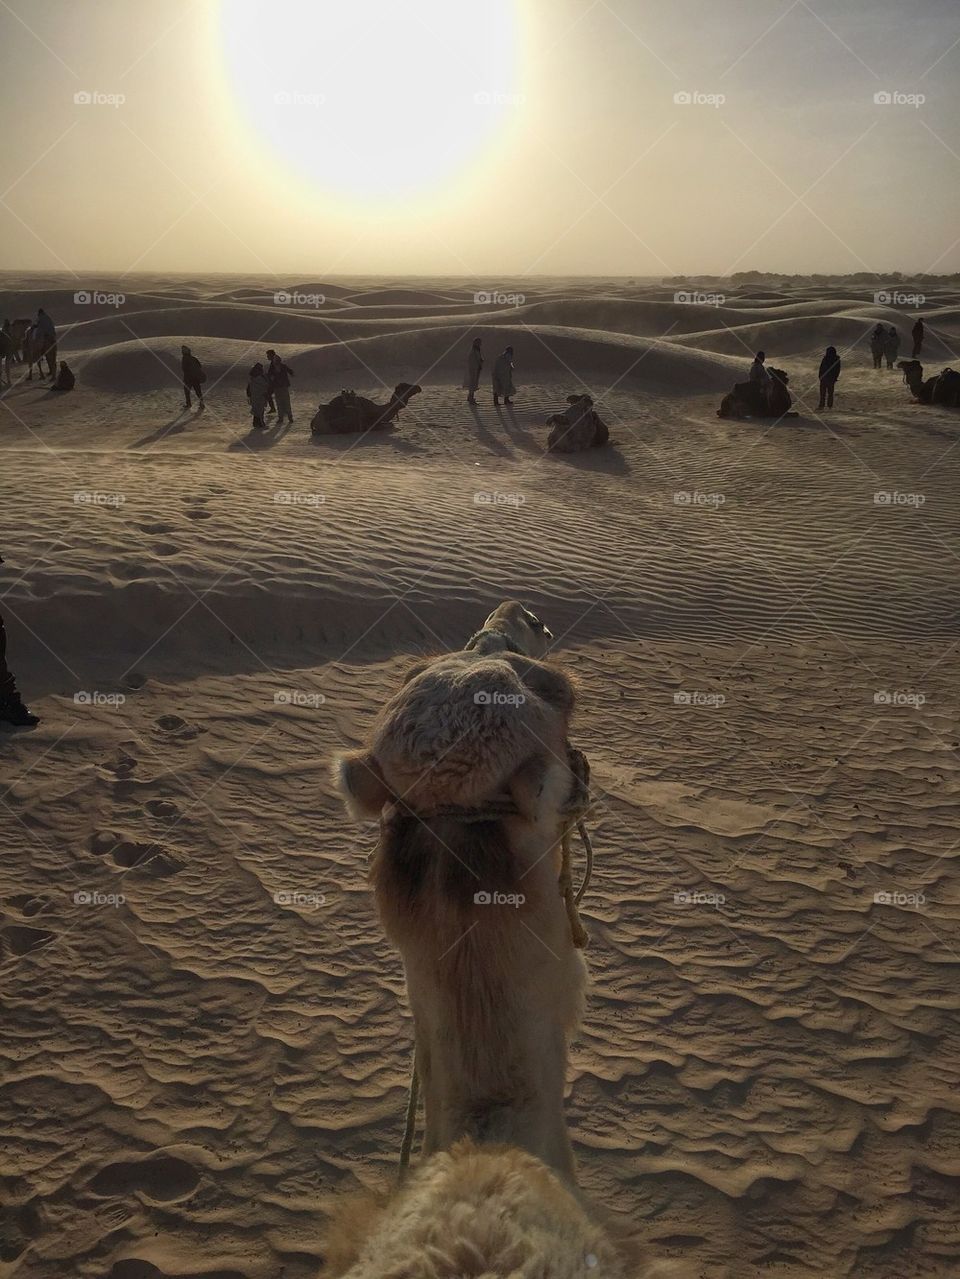 Sunset in the Sahara desert in Tunisia whilst on a camel ride